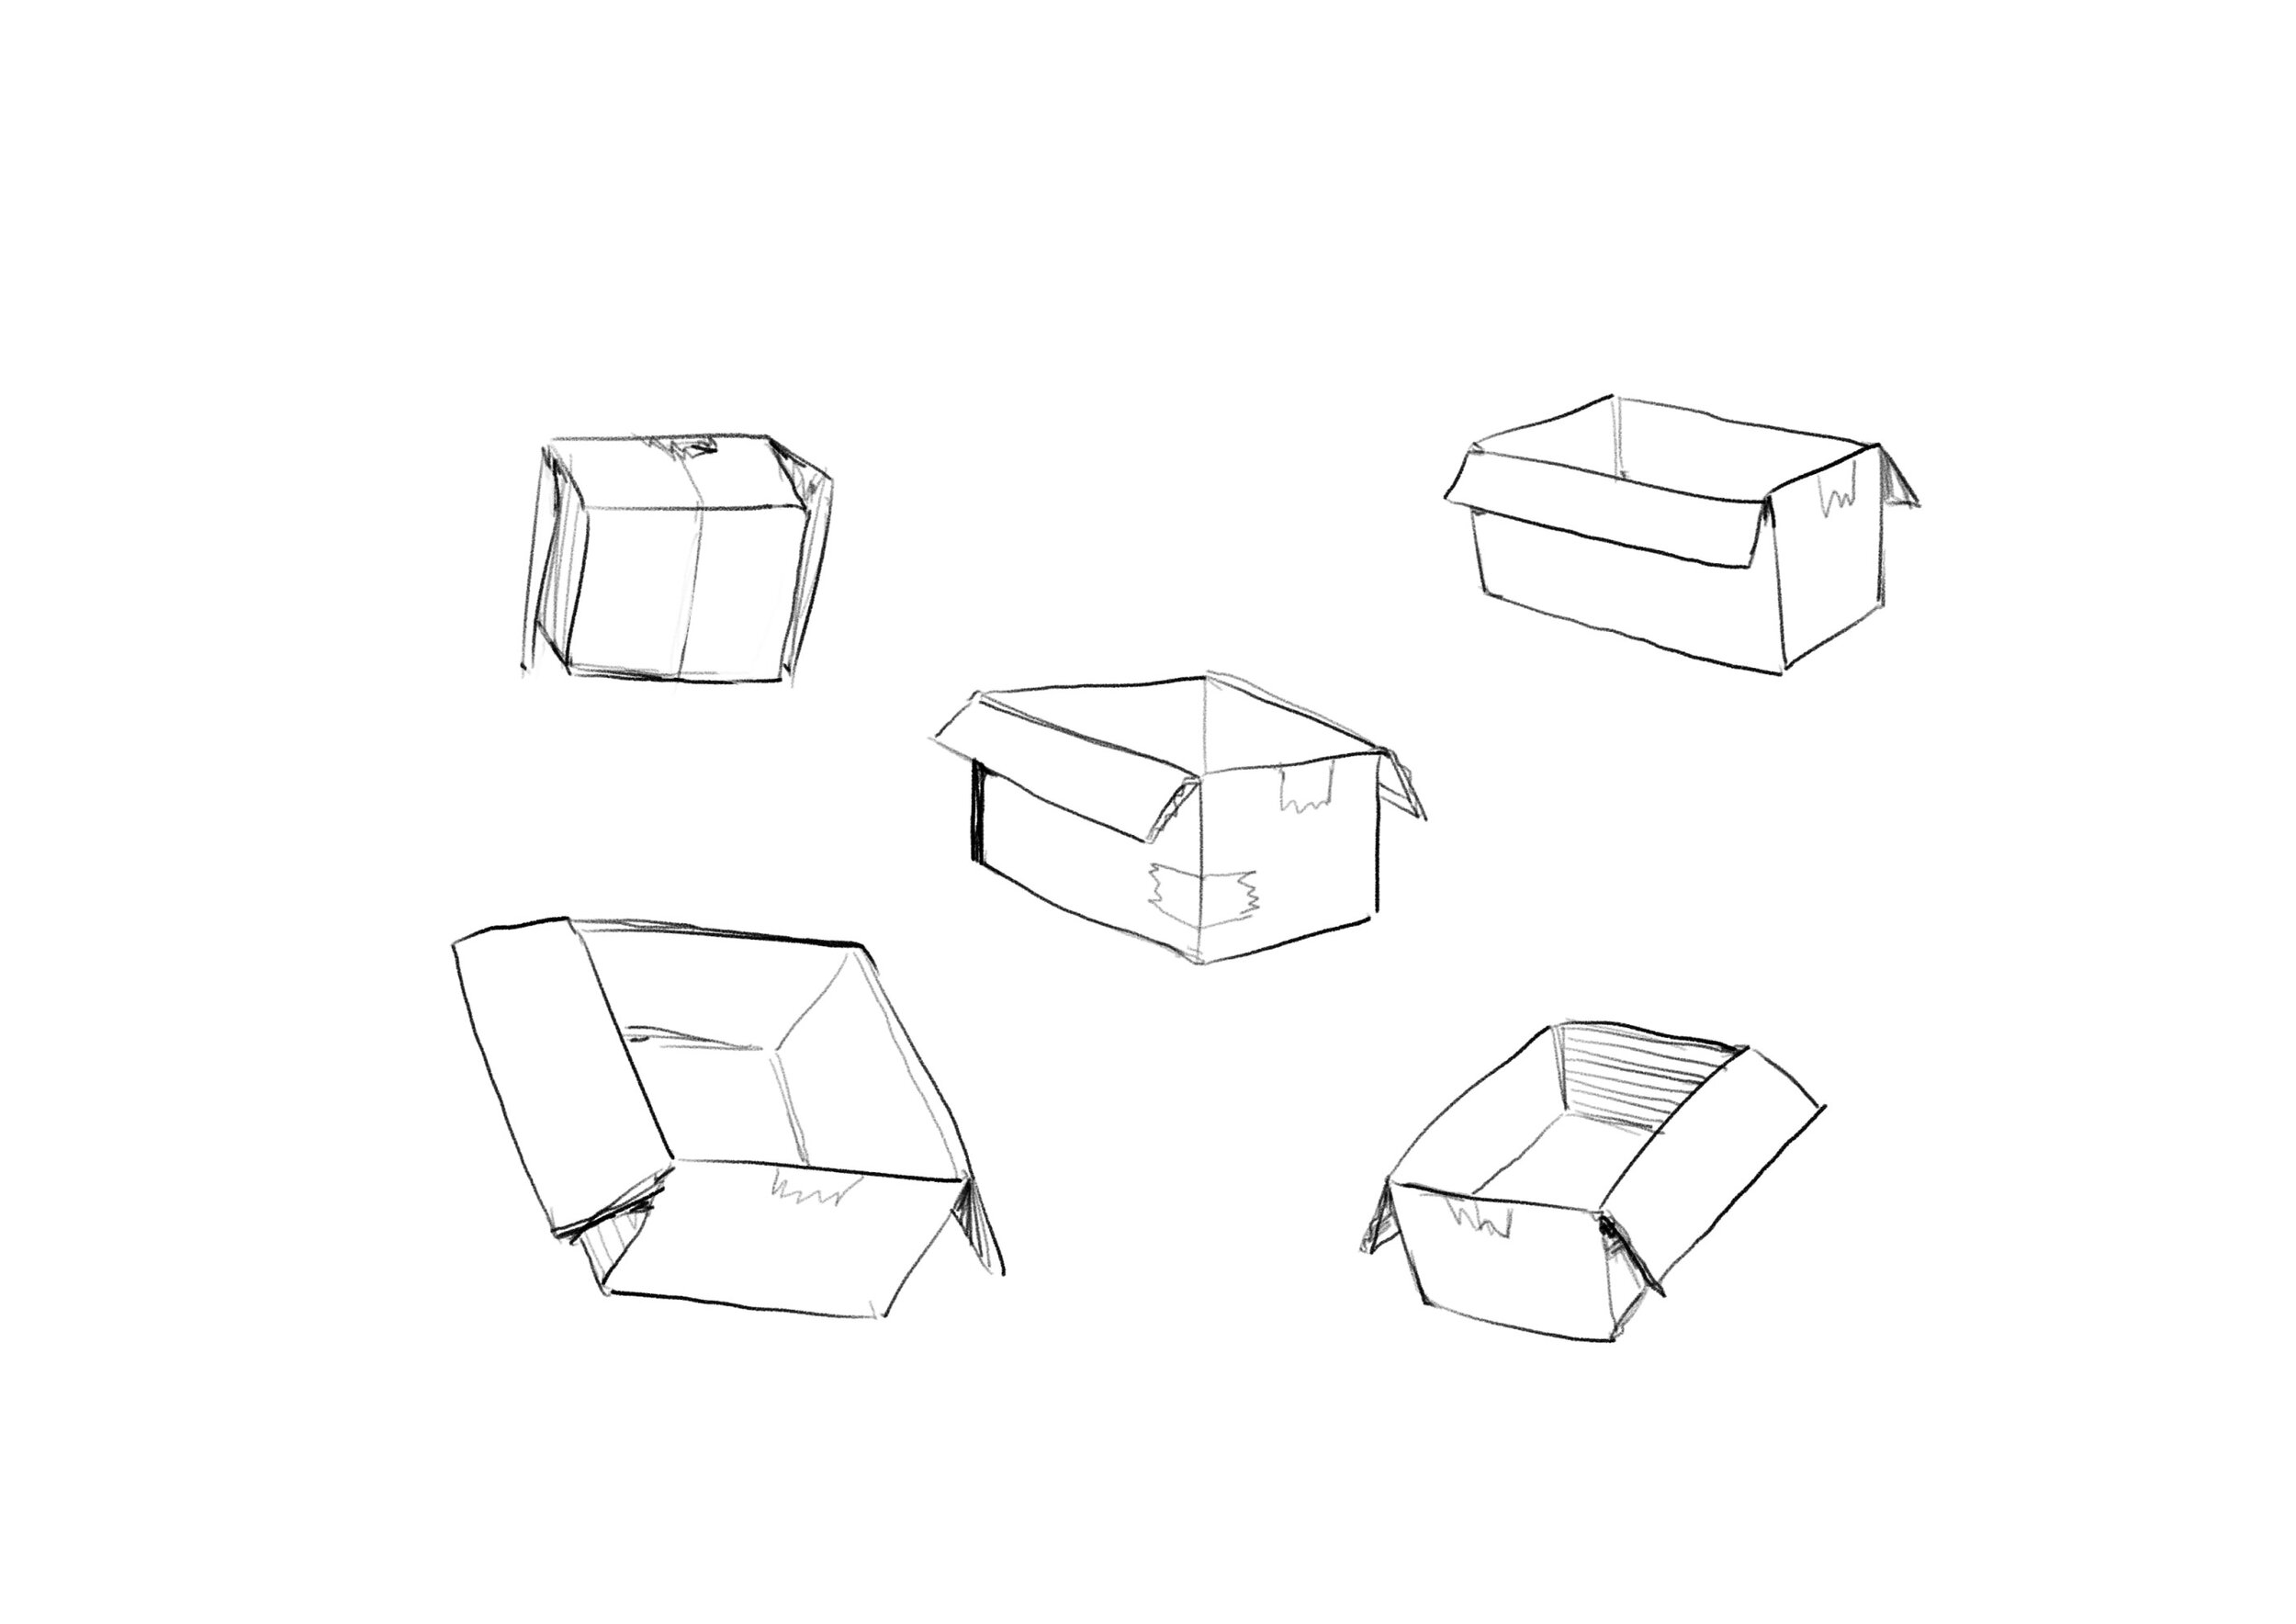 Top more than 150 basic simple sketches latest